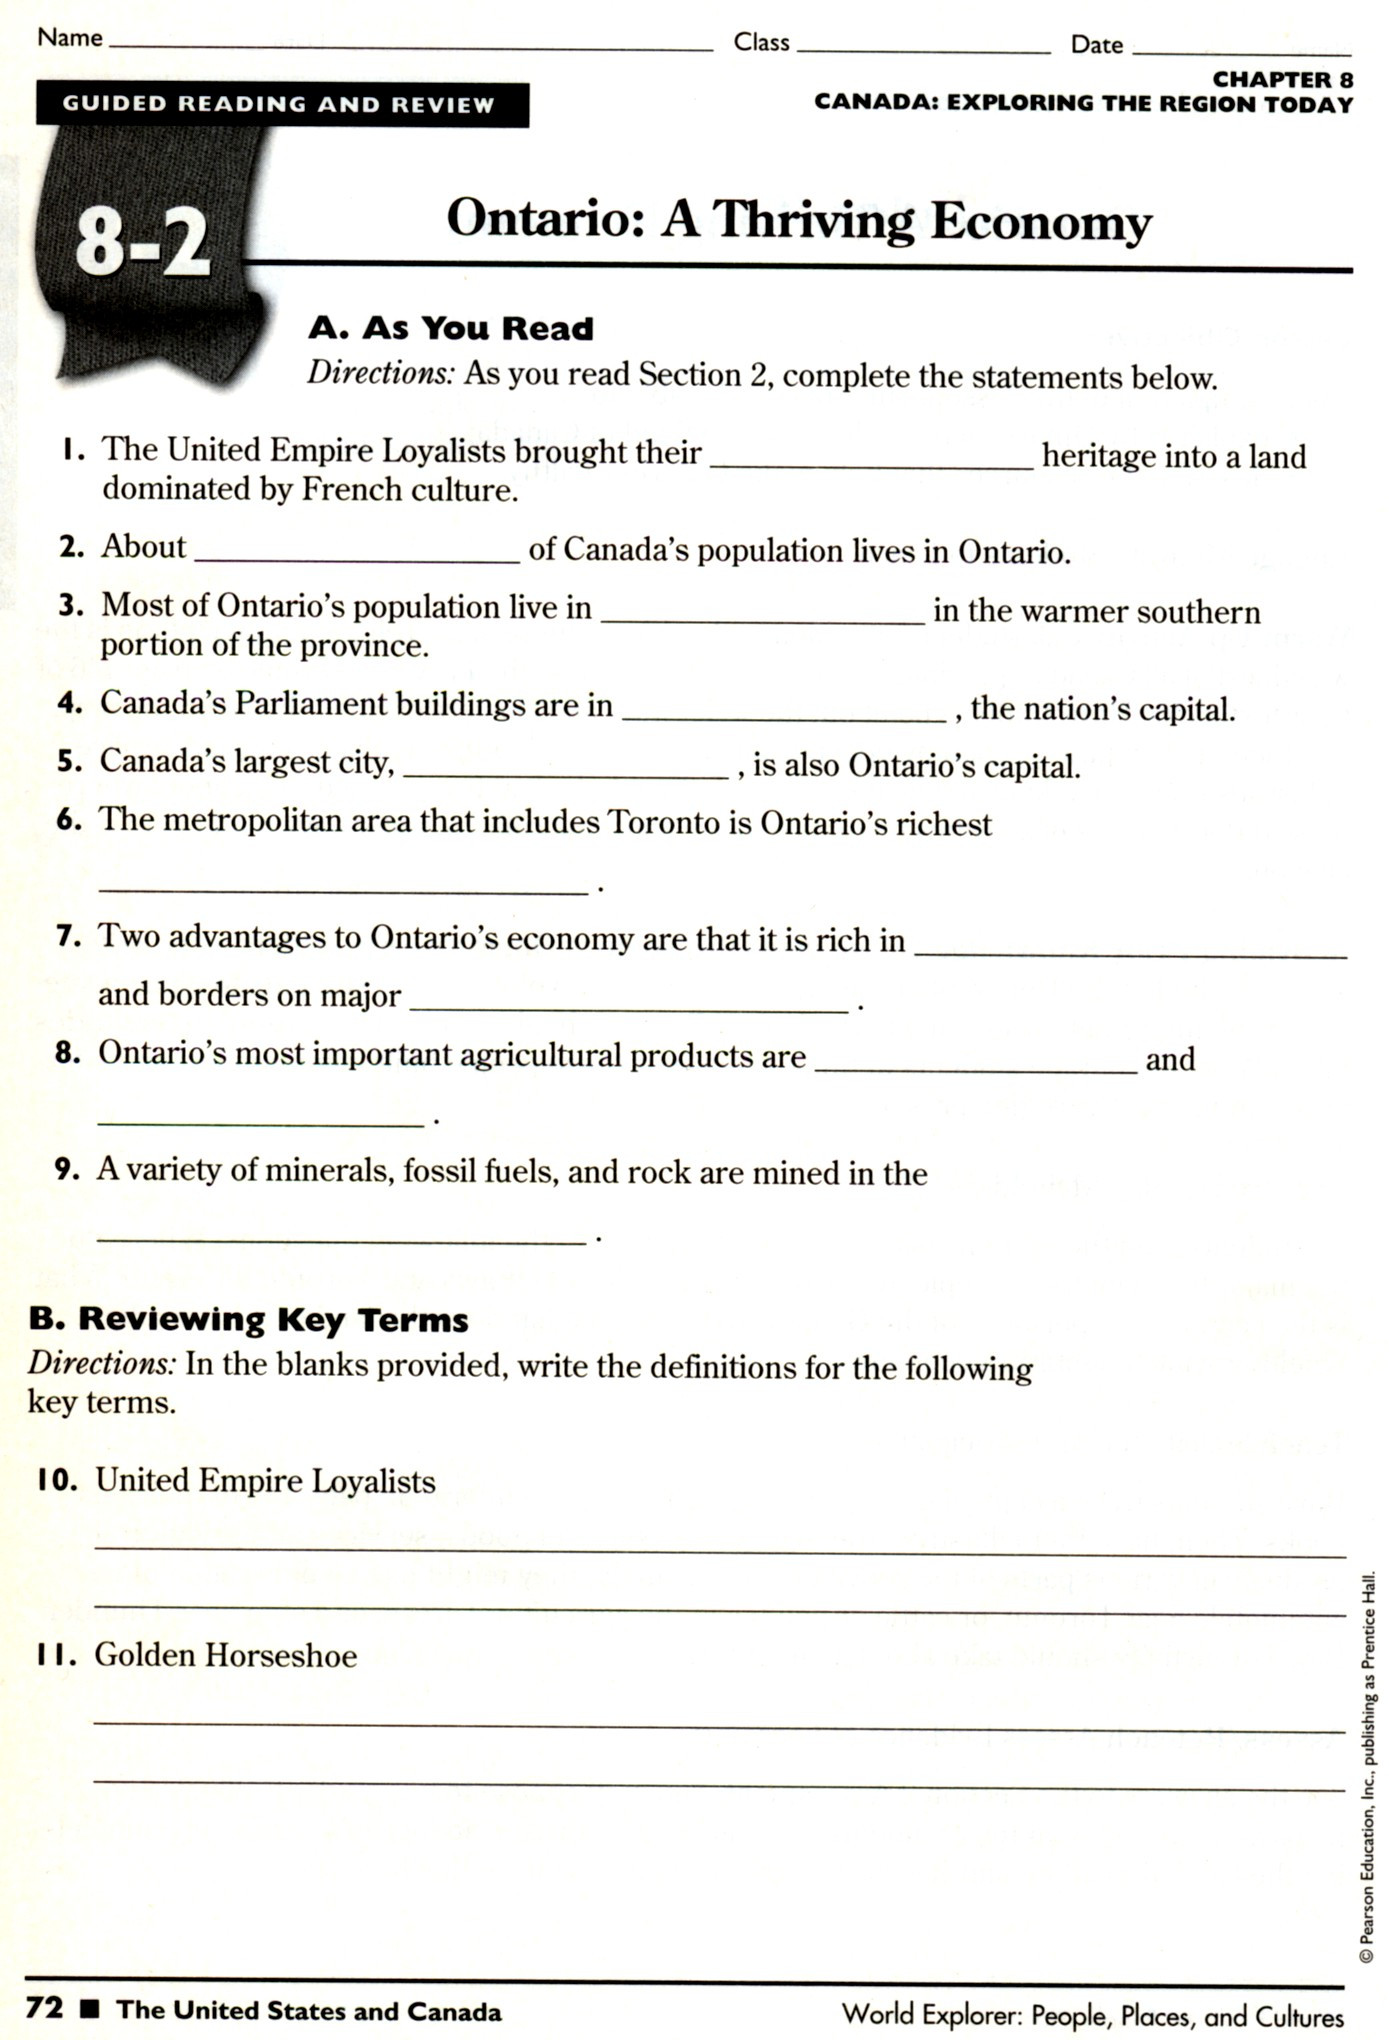 7th Grade World History Worksheets Physical Geography the United States and Canada Worksheet